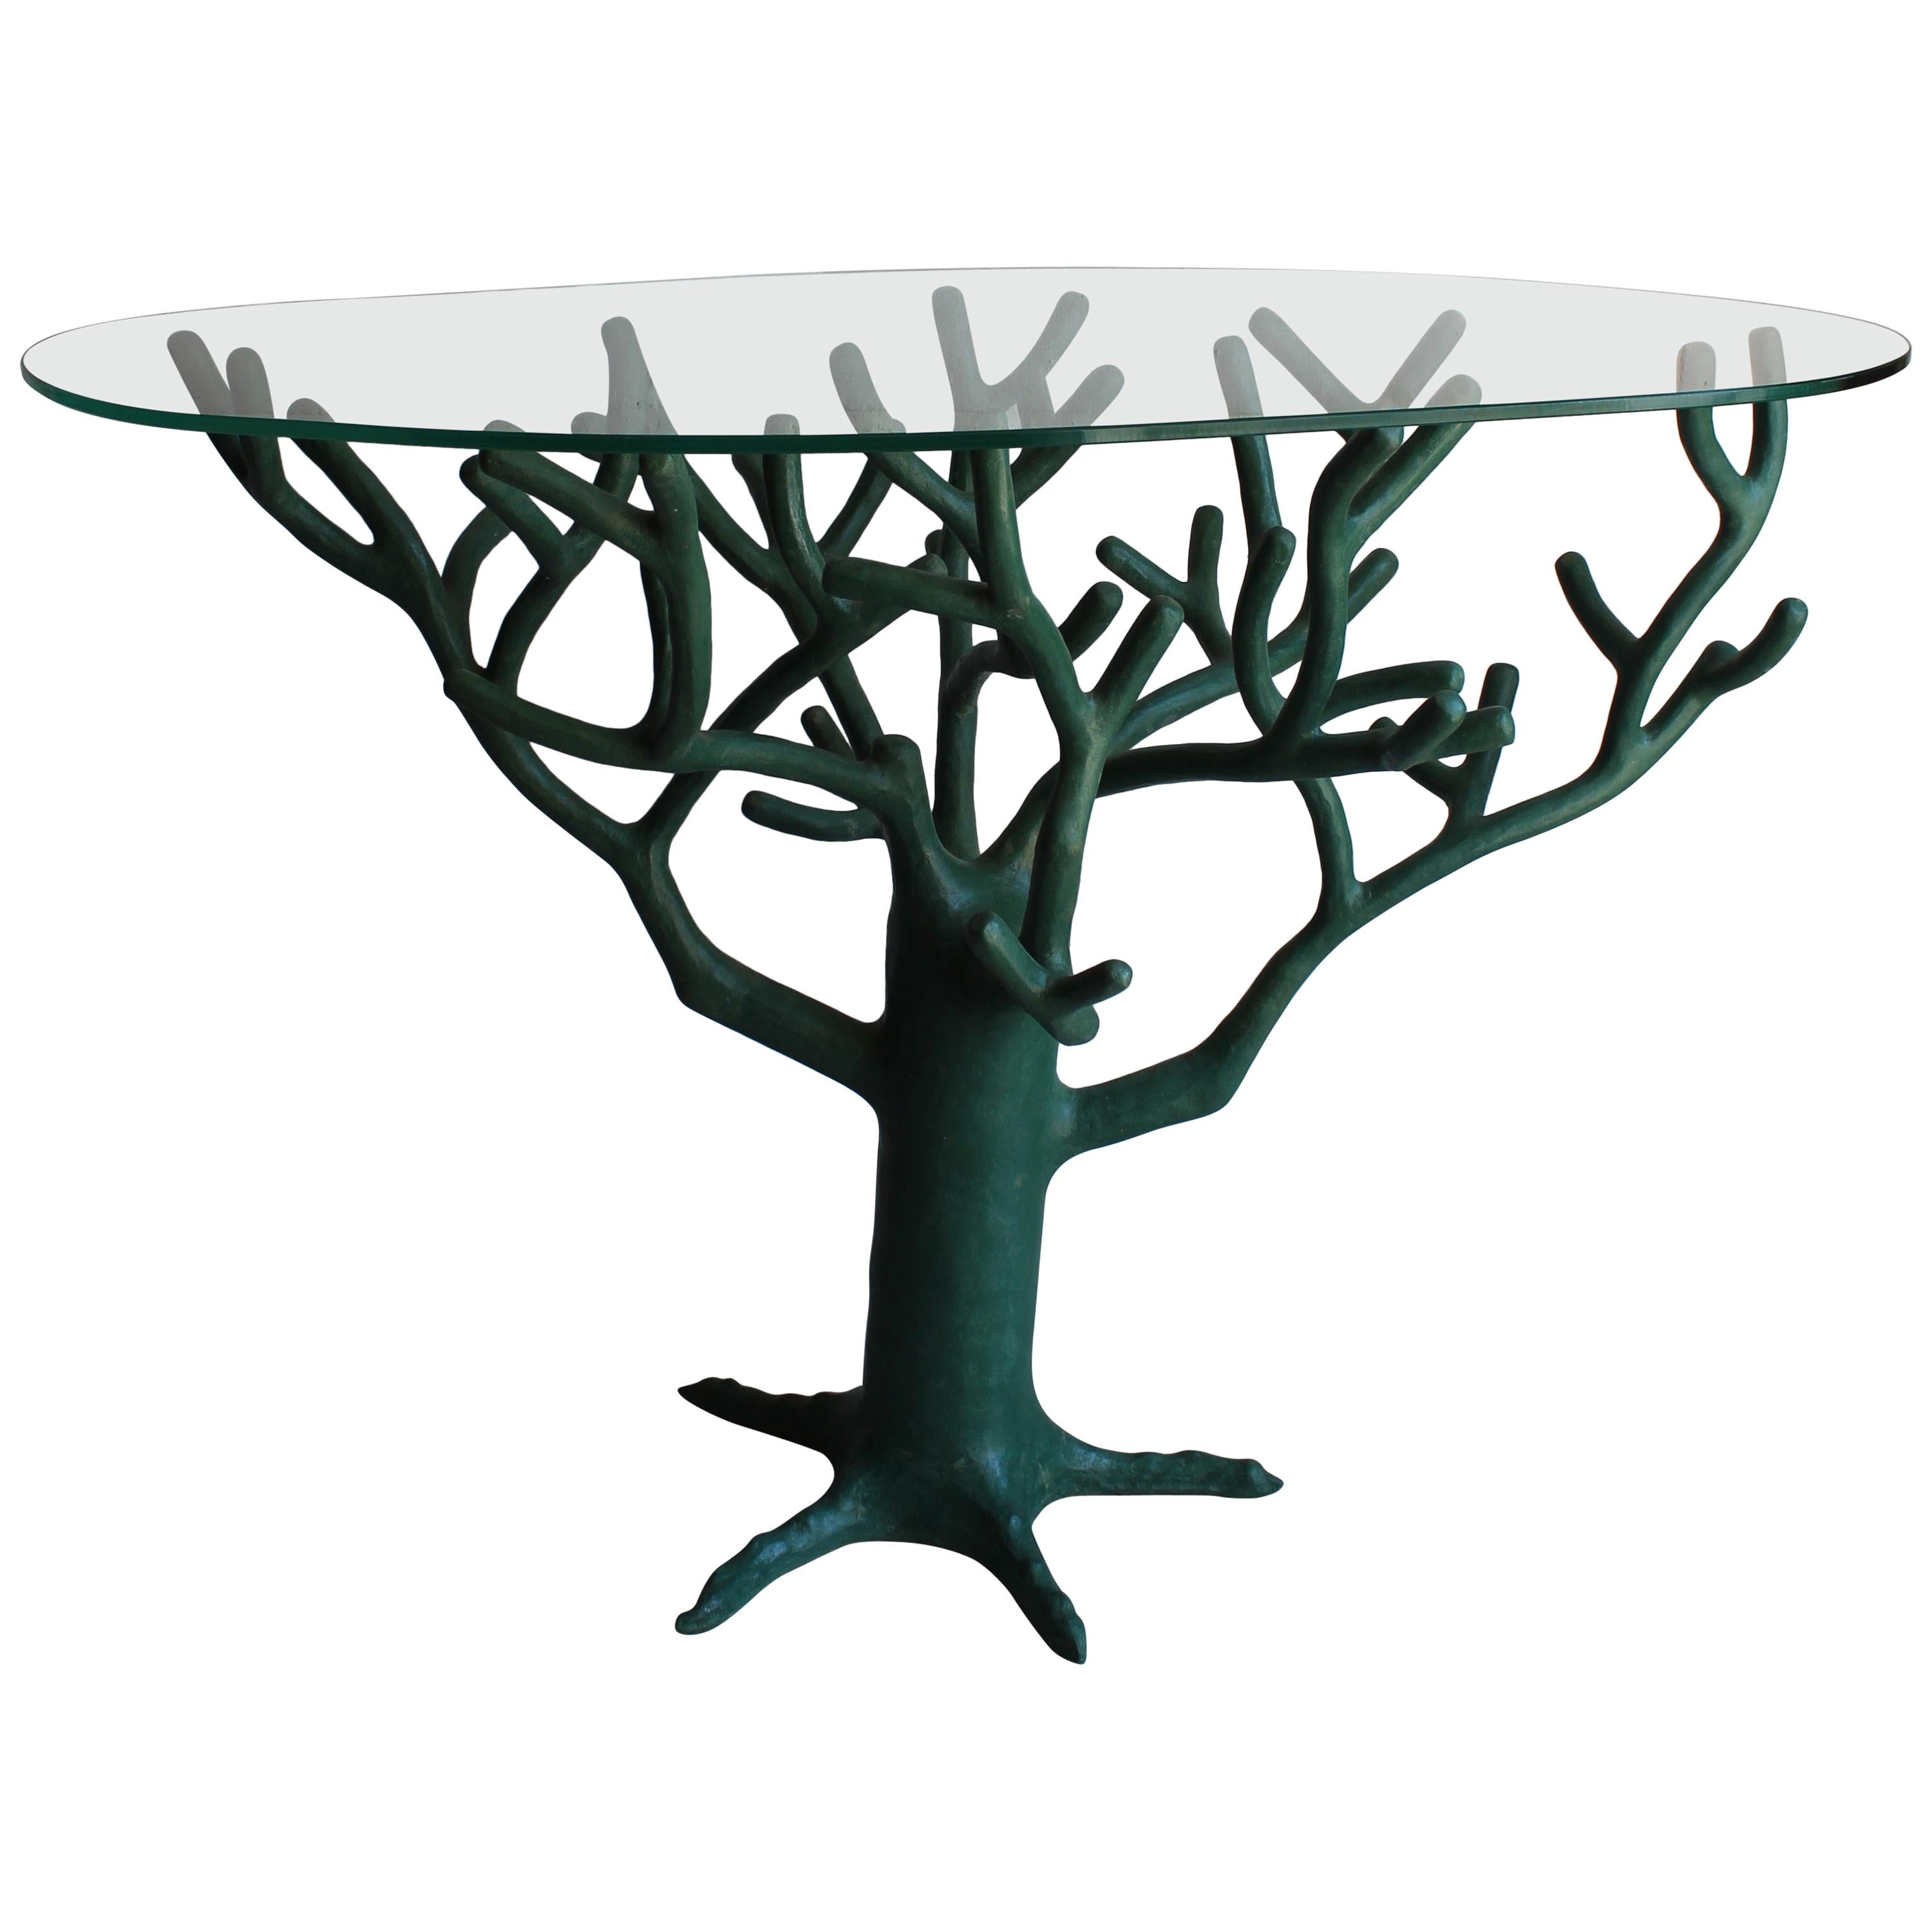 French Green Resin Tree Sculpture Table